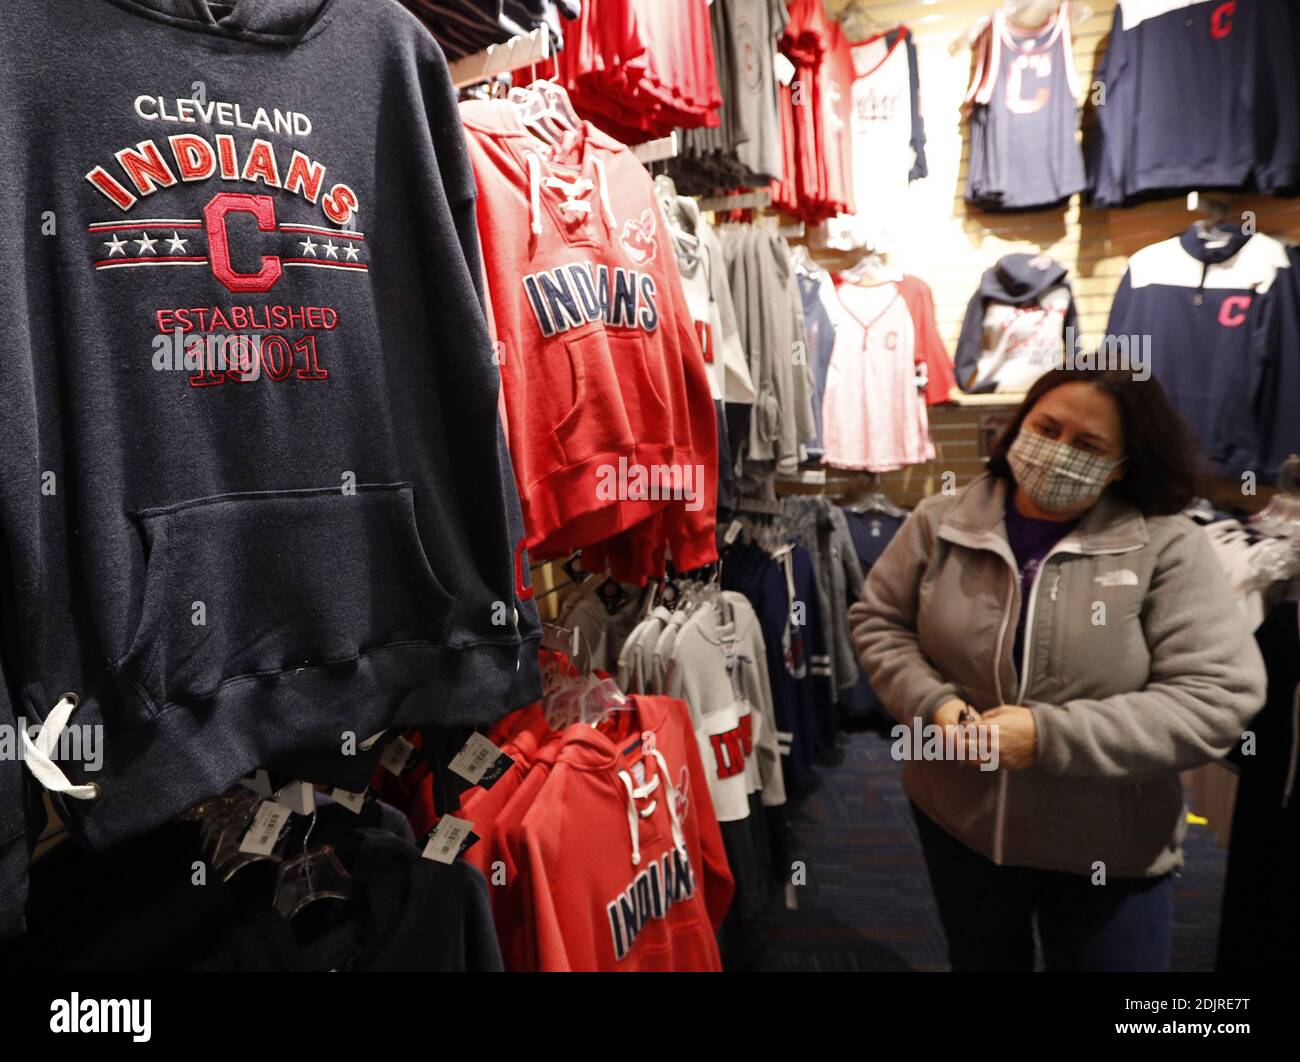 Cleveland, United States. 14th Dec, 2020. A woman shops for